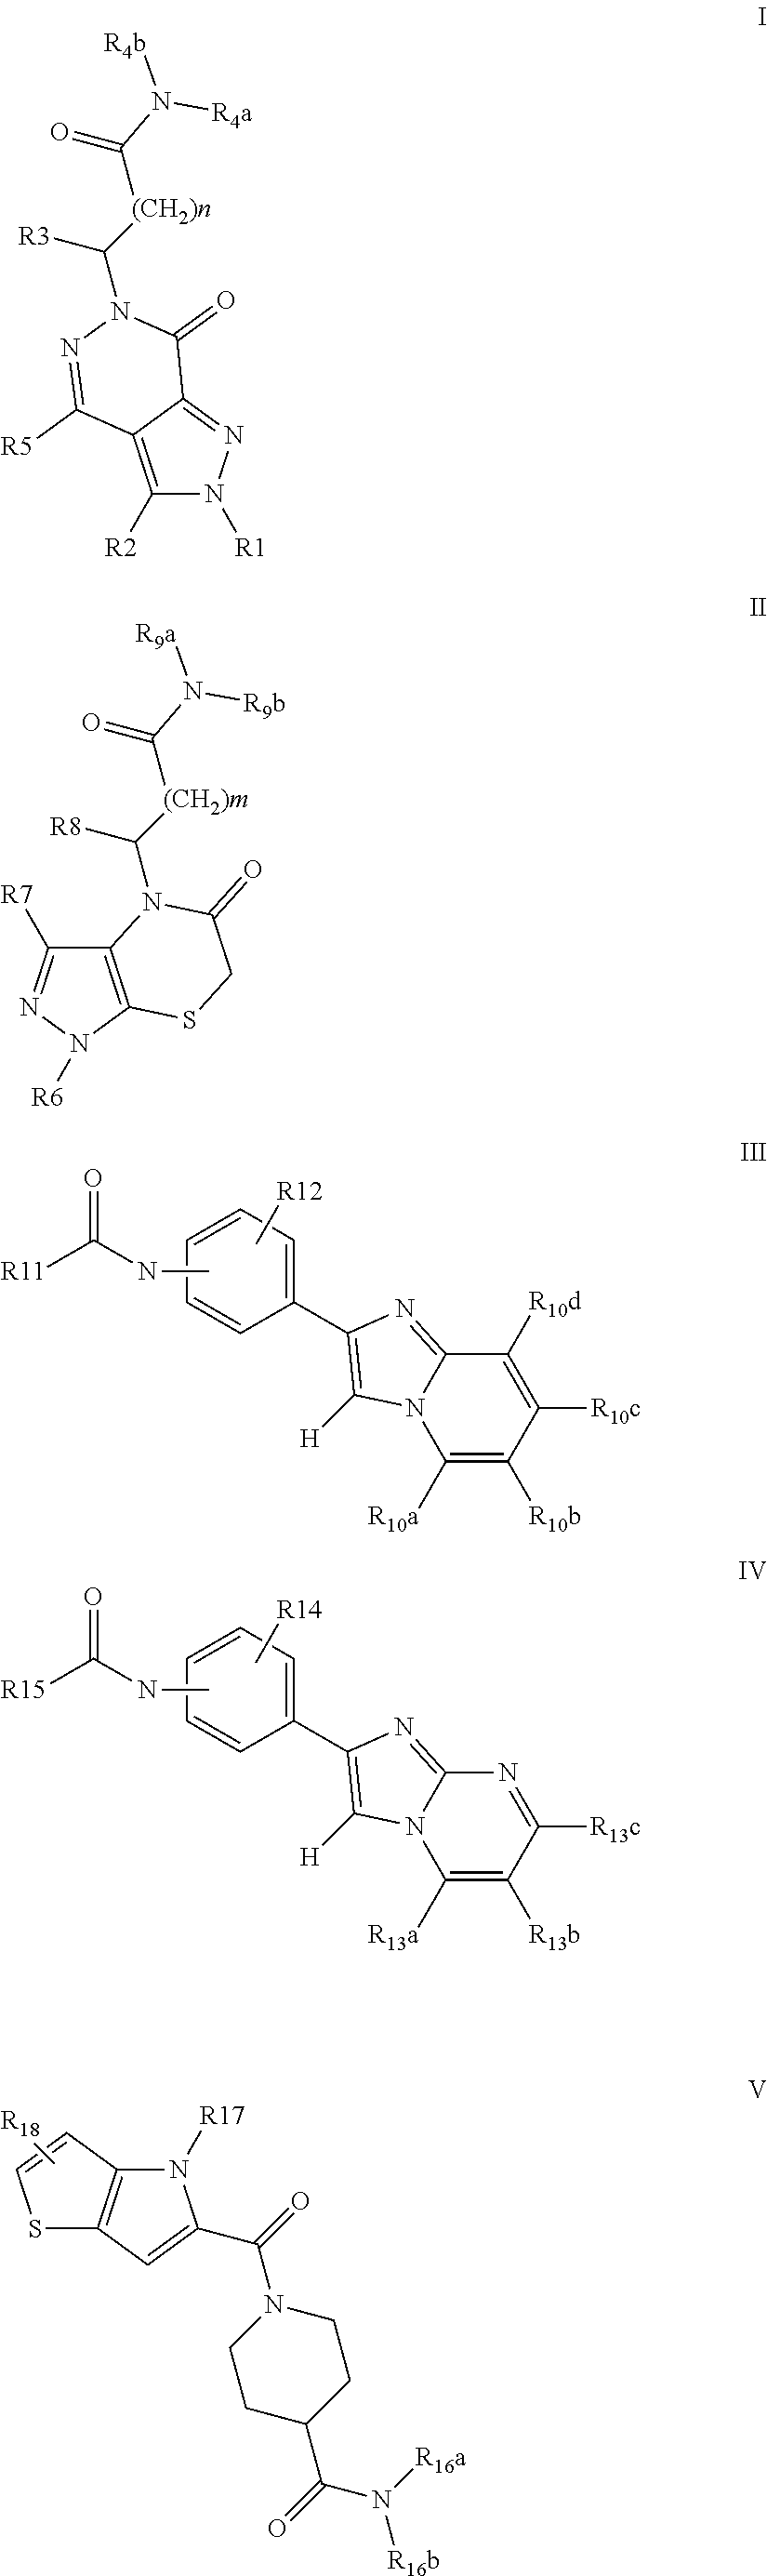 HETEROCYCLIC INHIBITORS OF AN Hh-SIGNAL CASCADE, MEDICINAL COMPOSITIONS BASED THEREON AND METHODS FOR TREATING DISEASES CAUSED BY THE ABERRANT ACTIVITY OF AN Hh-SIGNAL SYSTEM